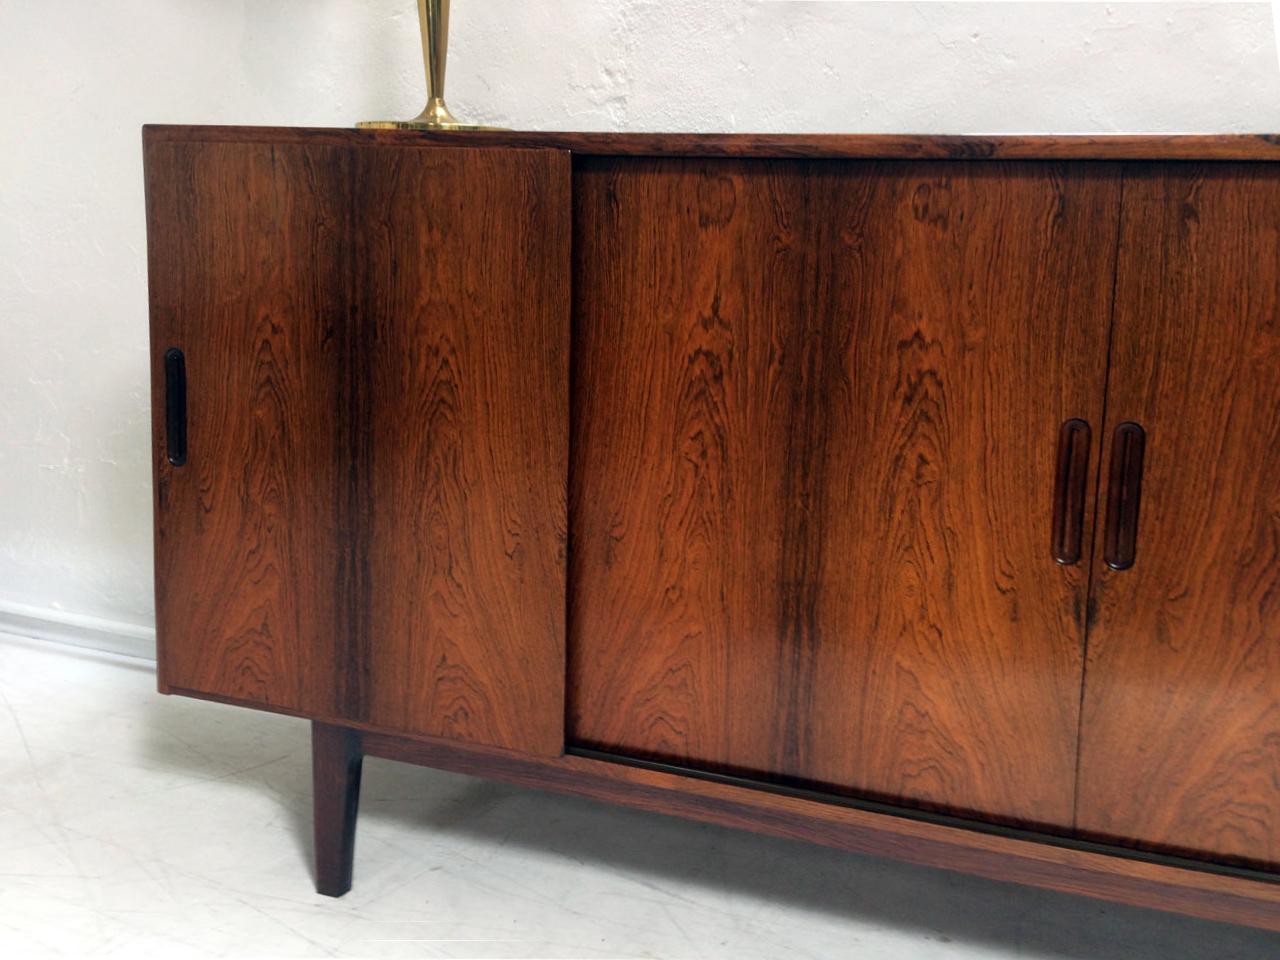 A superb Danish rosewood highboard in the style of Gunni Omann. The left hand door slides to reveal five green baise lined drawers, the central and right hand compartment contain adjustable shelves.
Super build quality, lovely veneers and in